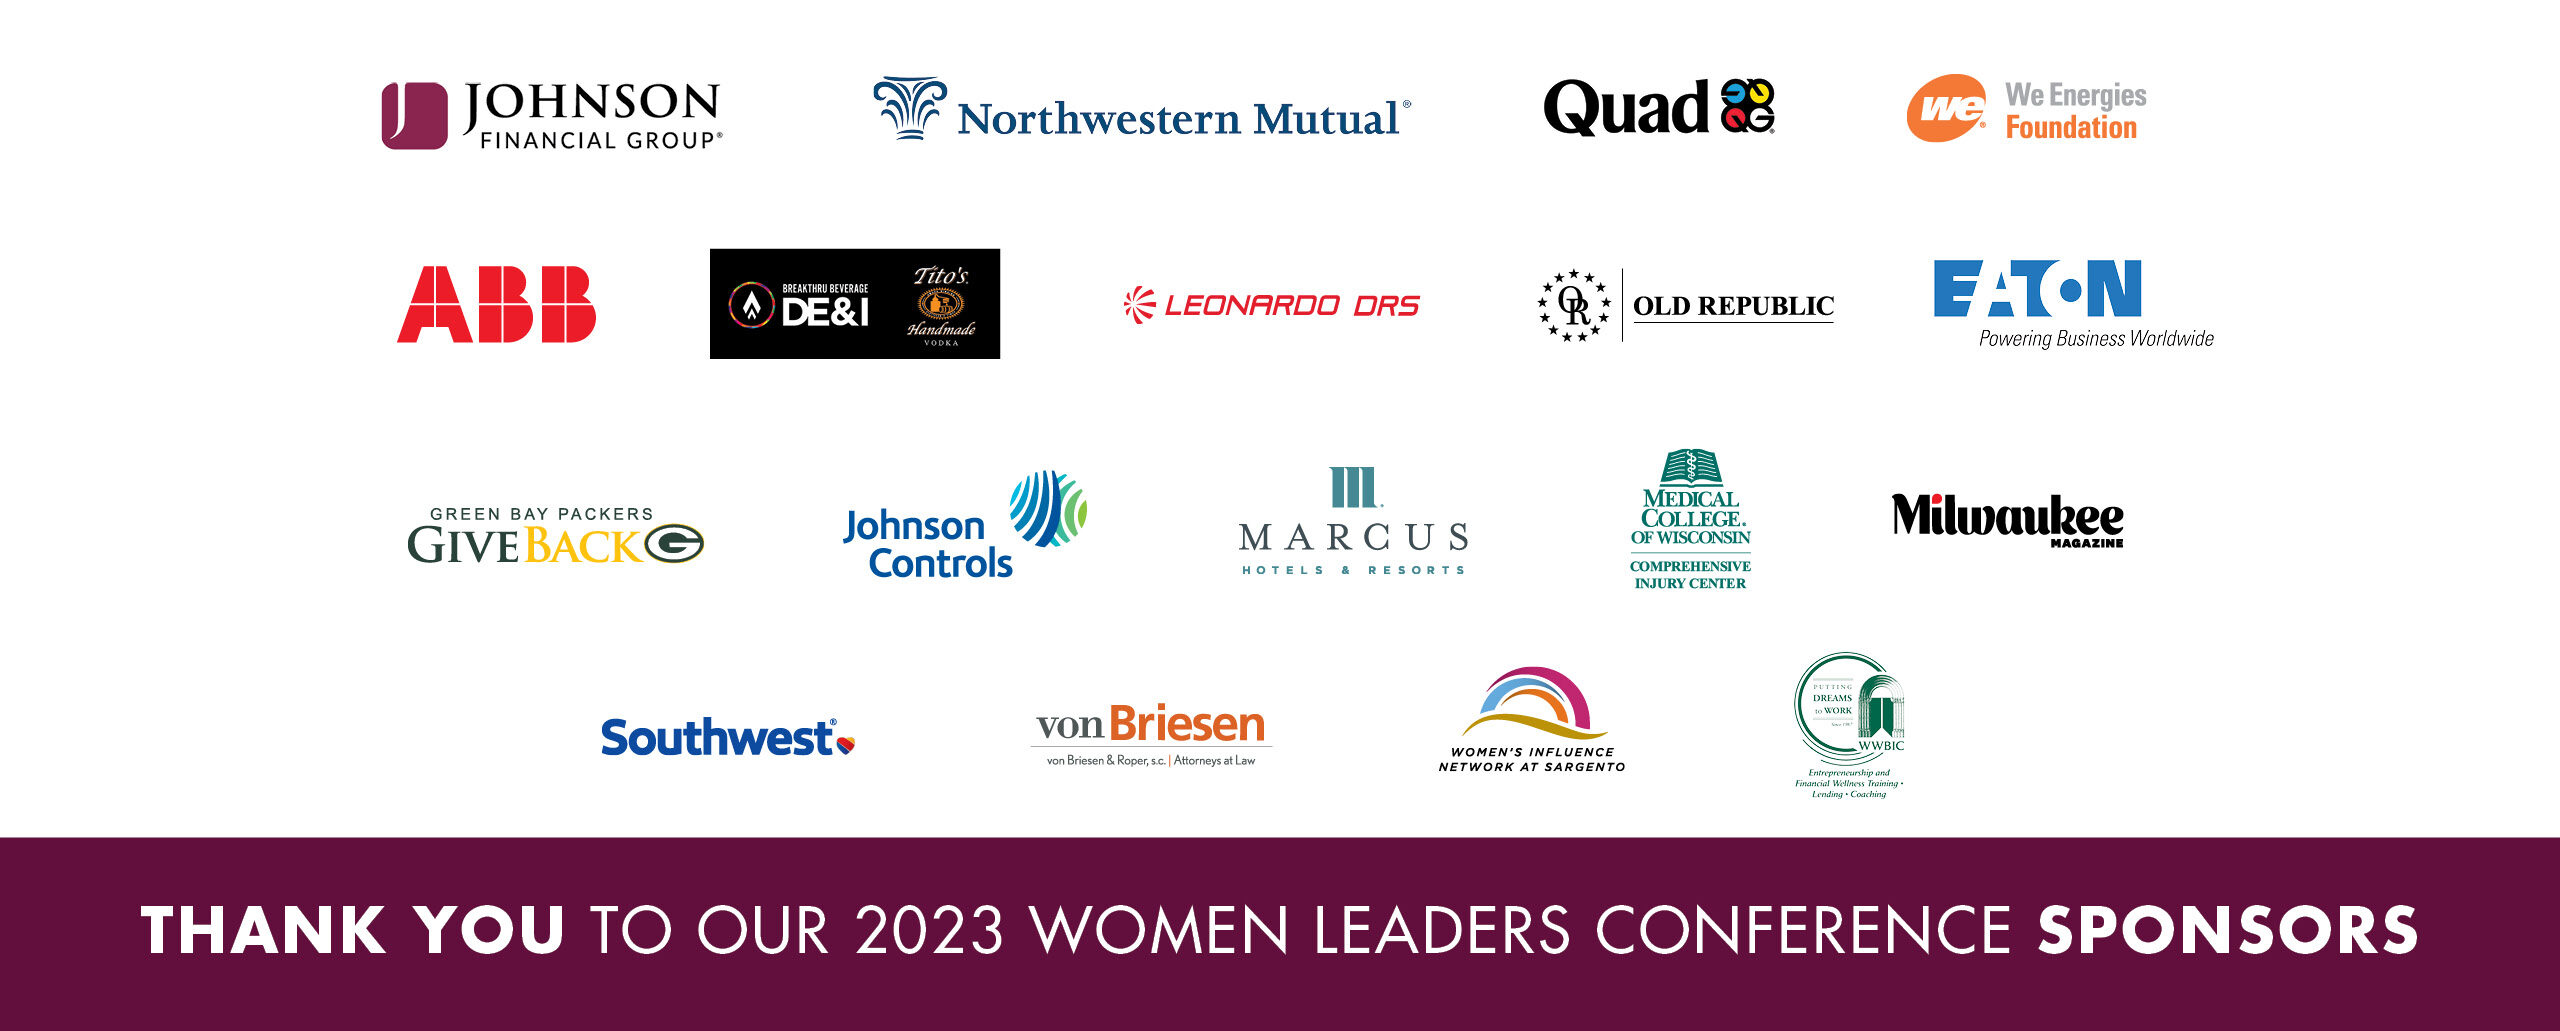 Thank you to our 2023 sponsors!